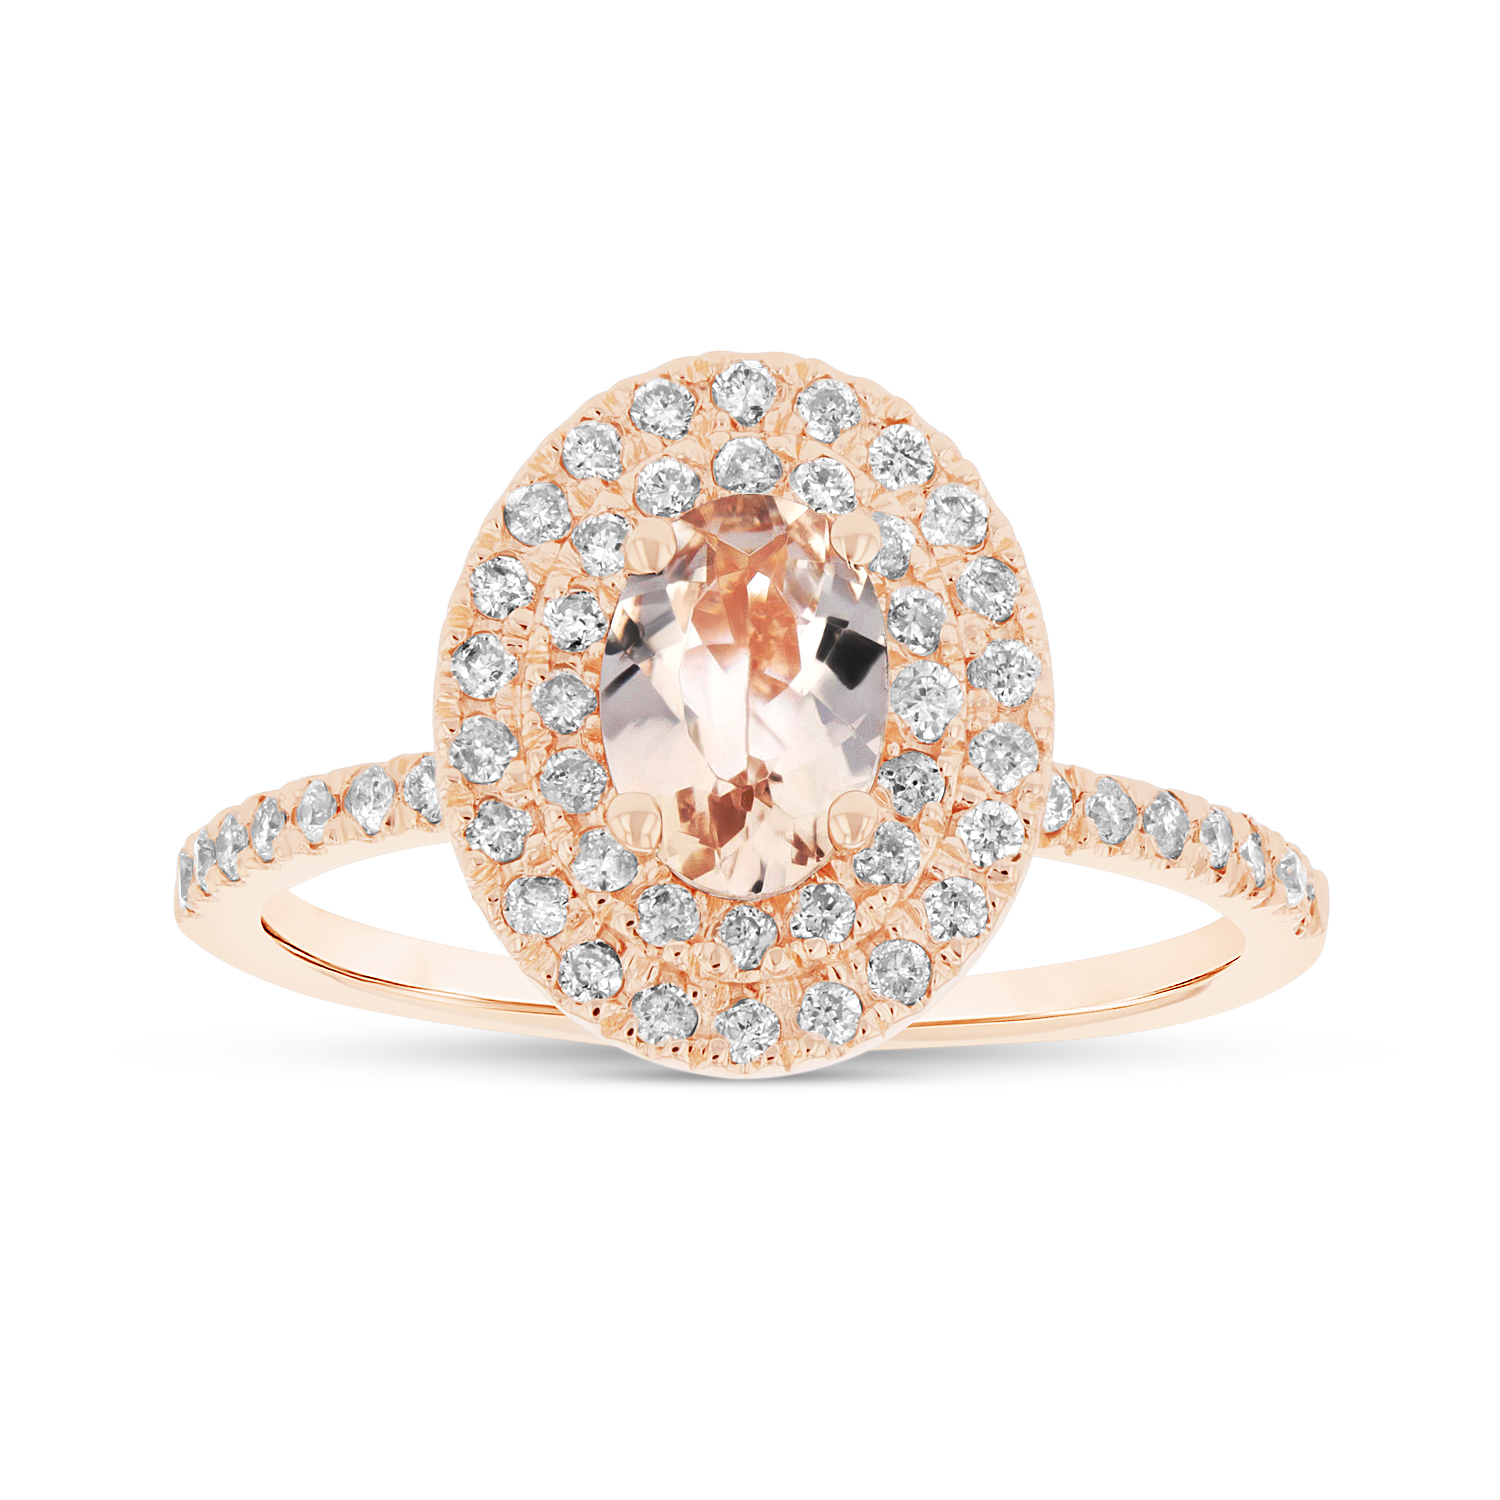 View 7X5 mm Oval Morganite and Diamond Ring in 14k Rose Gold Double Row Halo